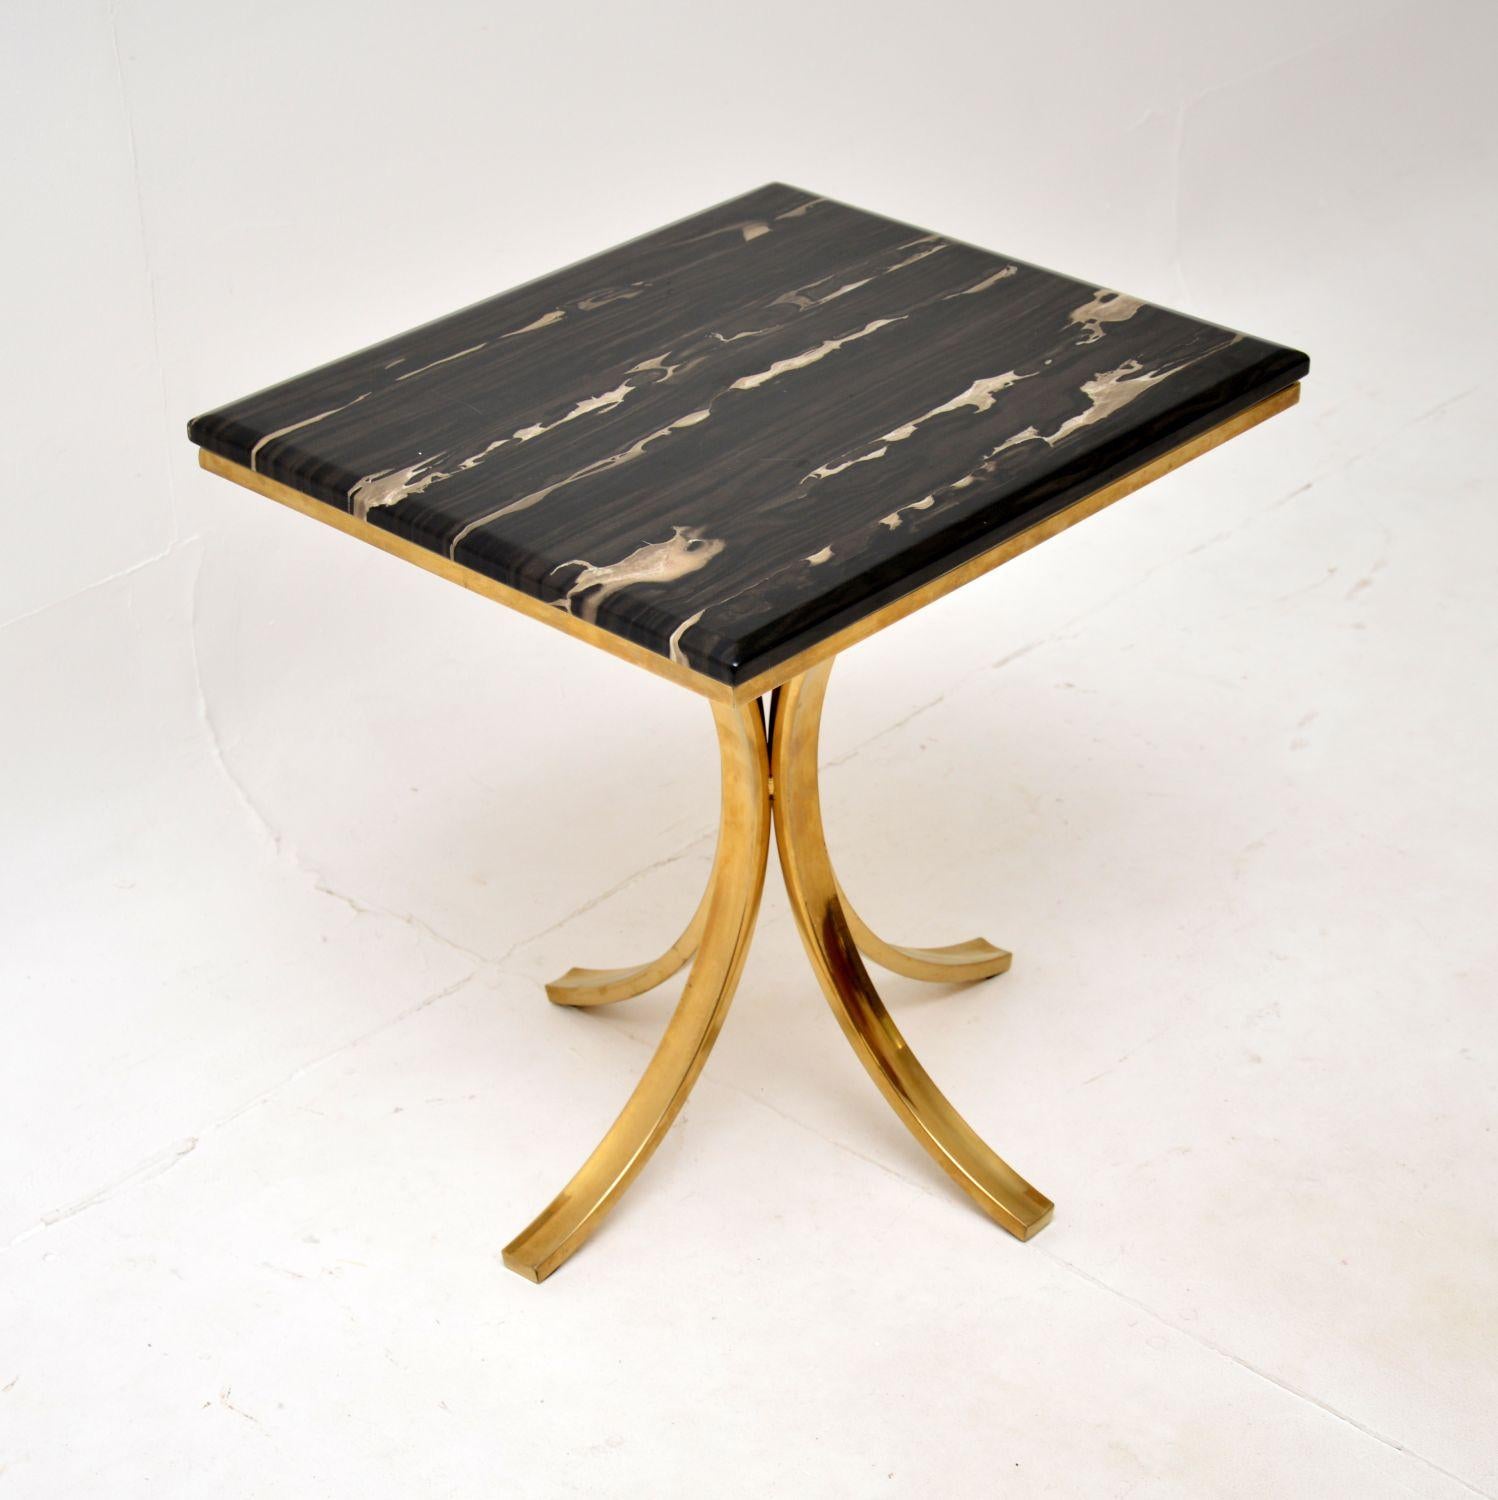 A stylish and very well made vintage brass and marble side table. This was made in Italy, it dates from around the 1970’s.

It is of excellent quality, the frame is beautifully designed and is made from brass plated aluminium. The loose marble top